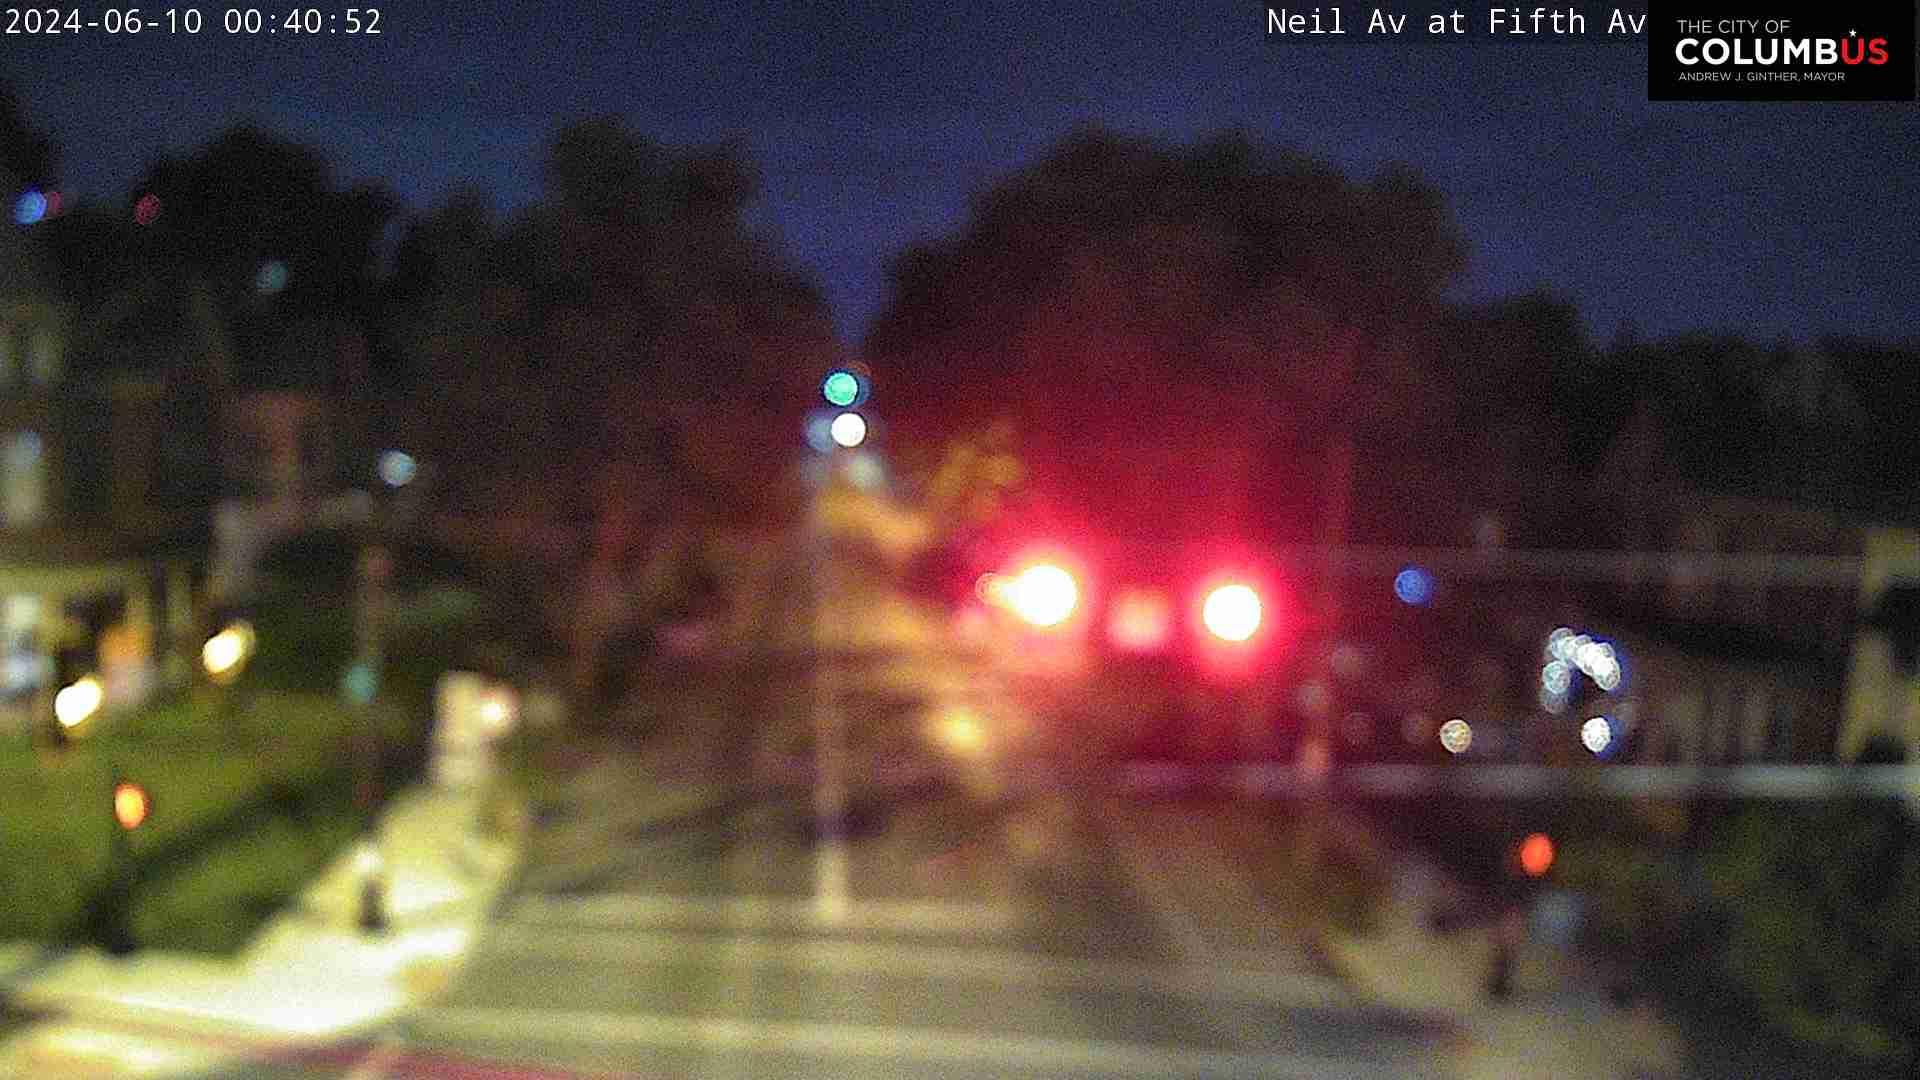 Traffic Cam Victorian Village: City of Columbus) Neil Ave at Fifth Ave